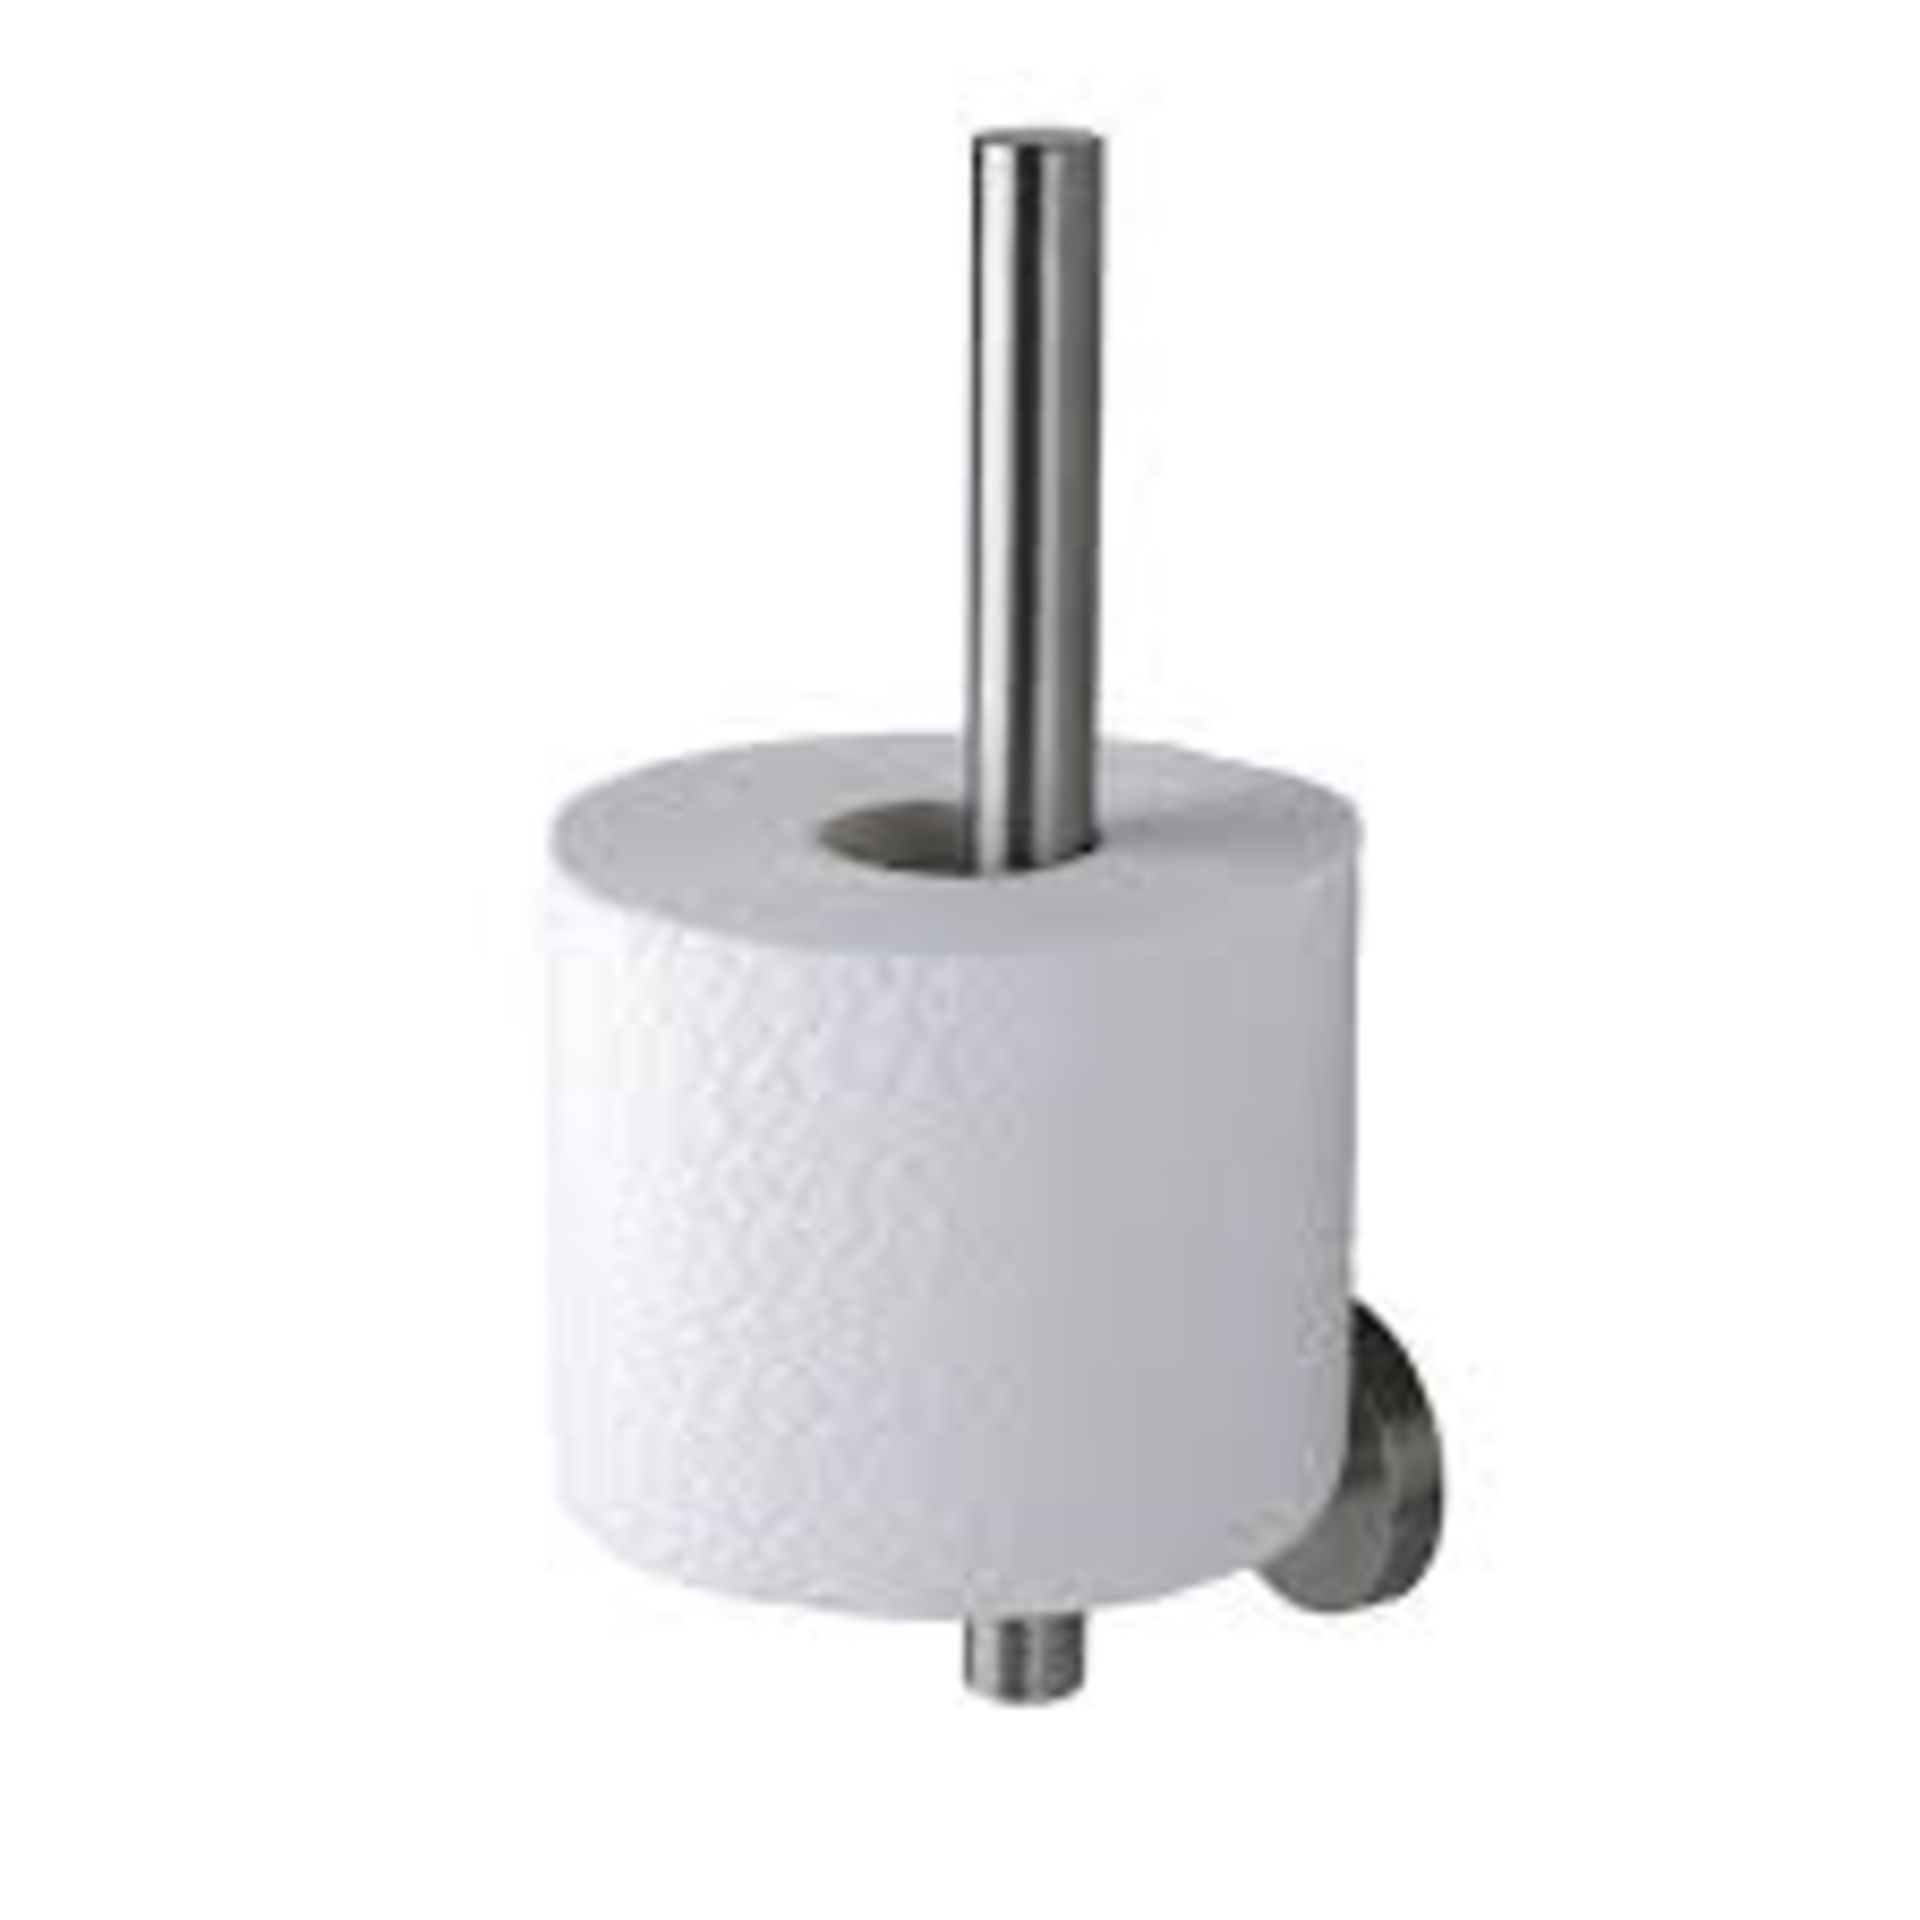 Boxed Boston Single Metal Toilet Roll Holder RRP £30 Each (16184) (Public Viewing and Appraisals